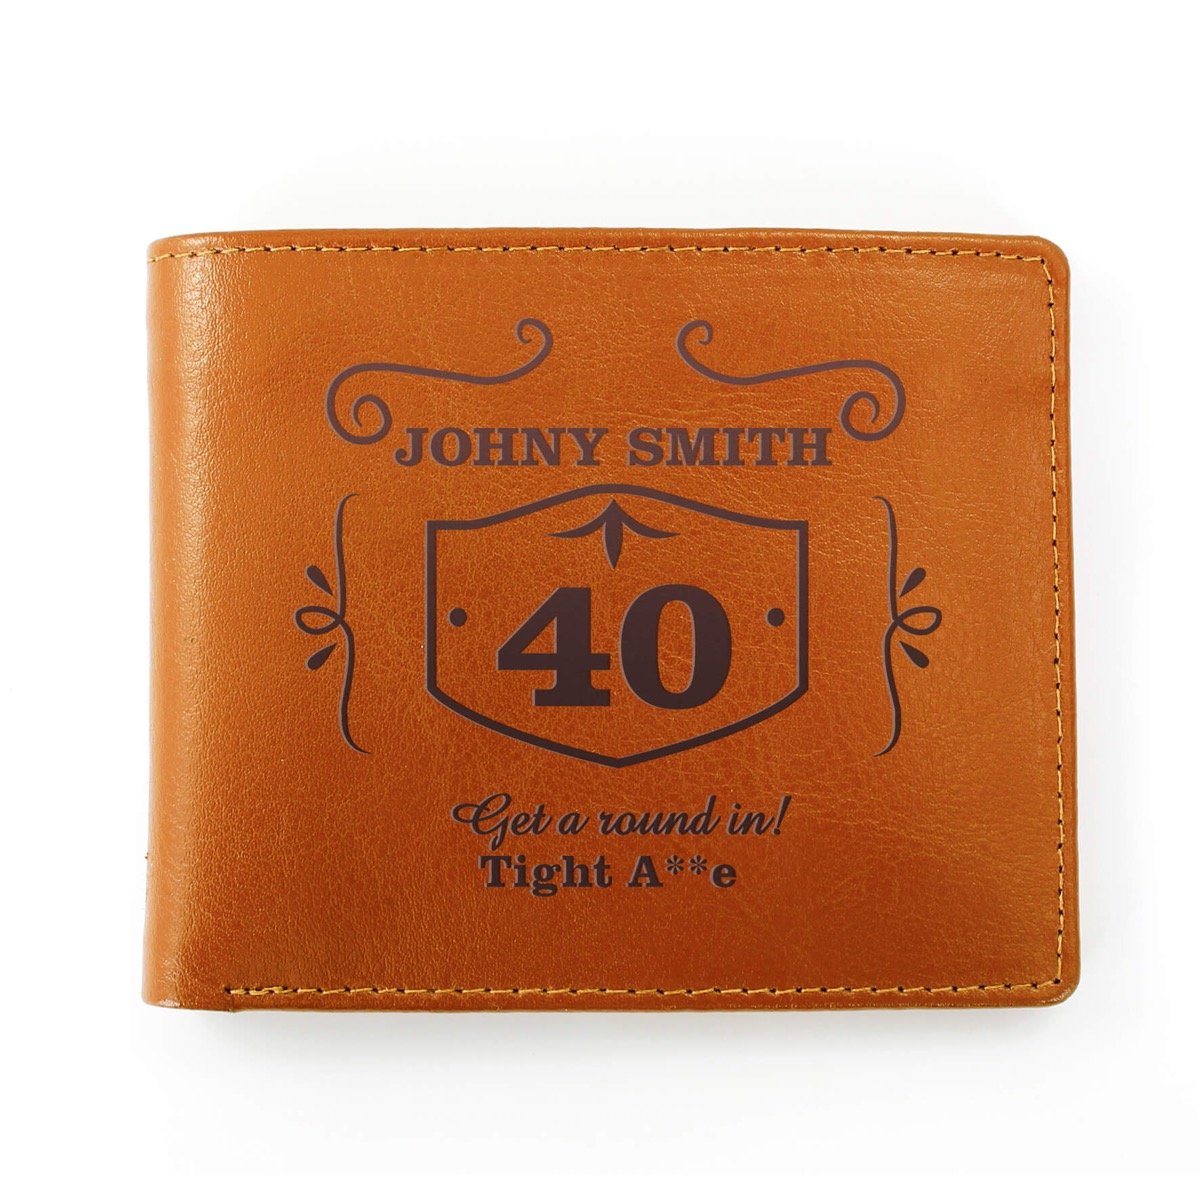 Personalised Classic Whisky Tan Leather Wallet